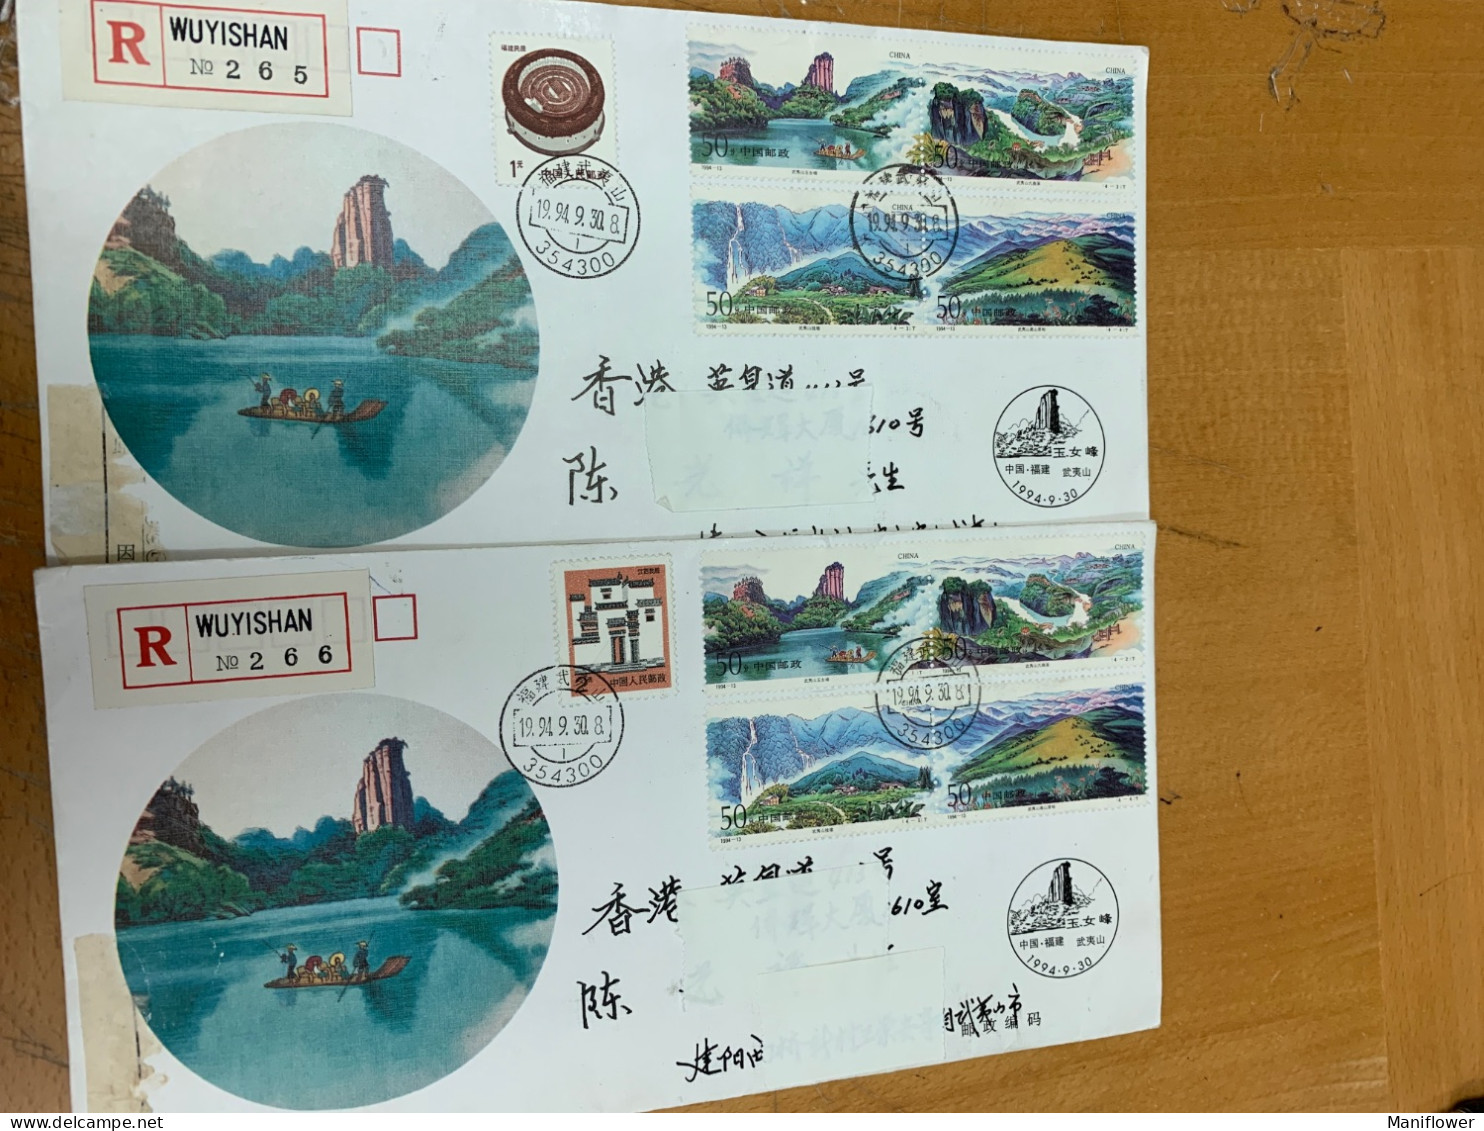 China Stamp 1994 Wuyishan Mountain River Postally Used Cover - 2000-2009